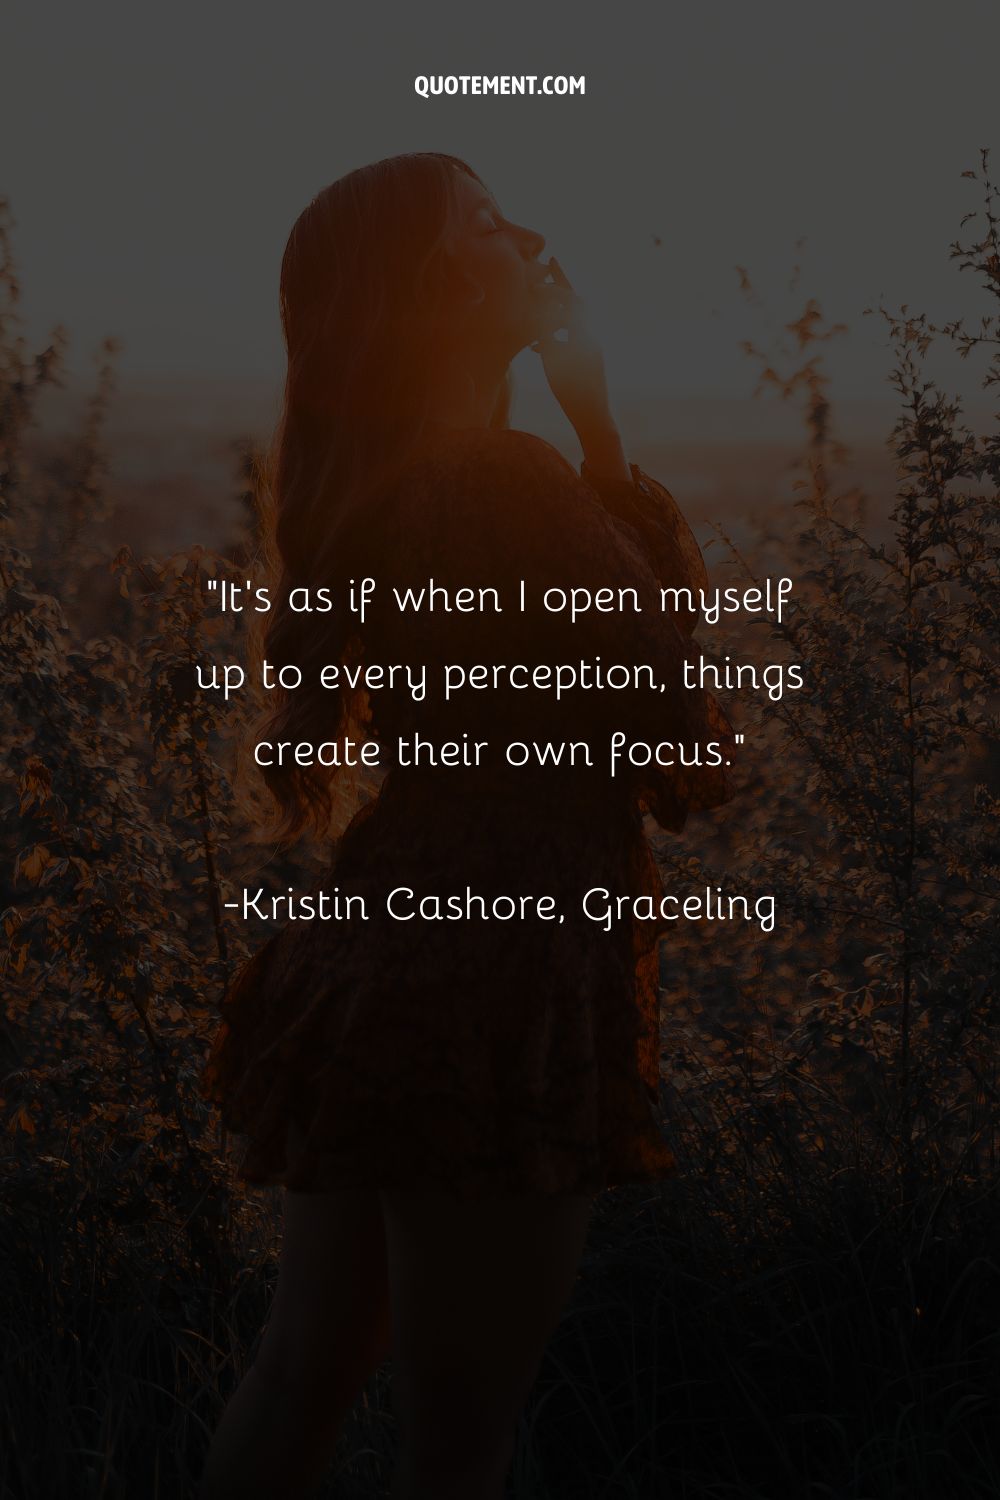 It's as if when I open myself up to every perception, things create their own focus.